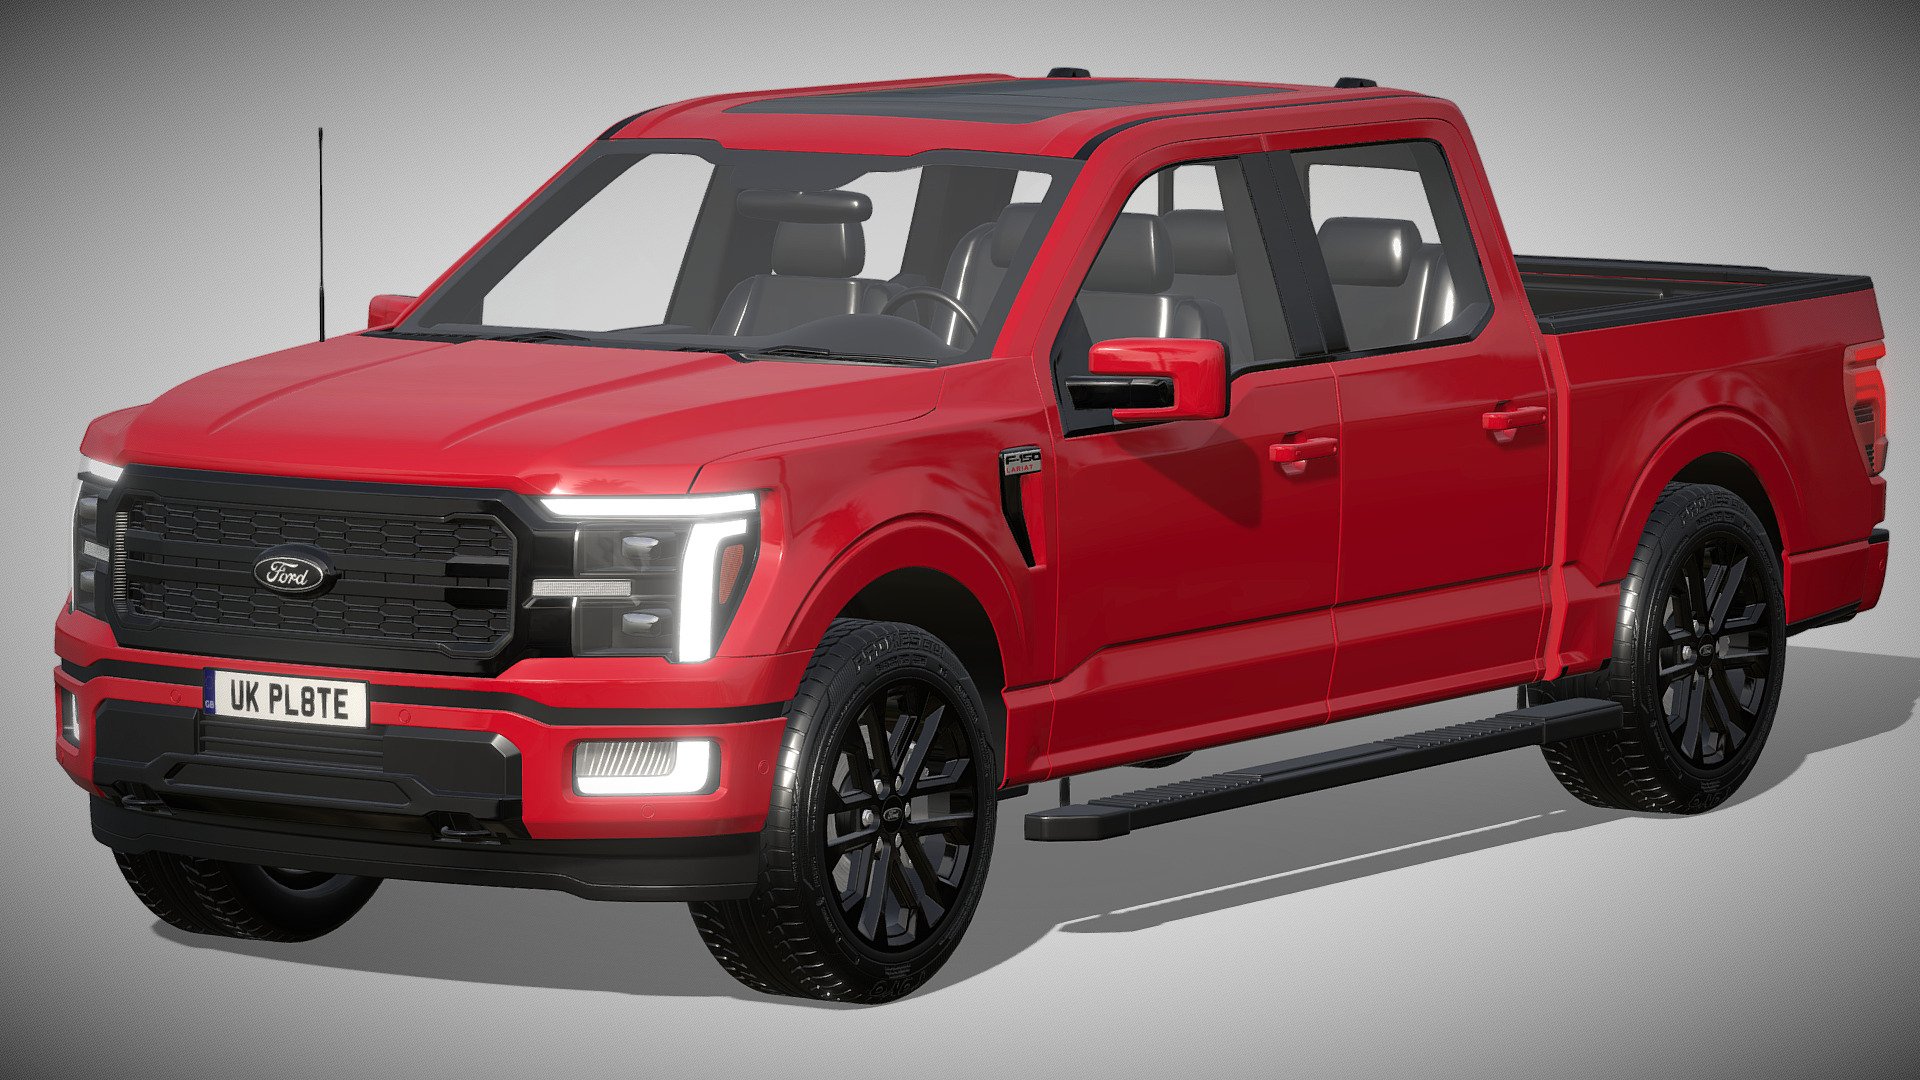 Ford F-150 LARIAT 2024

https://www.ford.com/trucks/f150/2024/

Clean geometry Light weight model, yet completely detailed for HI-Res renders. Use for movies, Advertisements or games

Corona render and materials

All textures include in *.rar files

Lighting setup is not included in the file! - Ford F-150 LARIAT 2024 - Buy Royalty Free 3D model by zifir3d 3d model